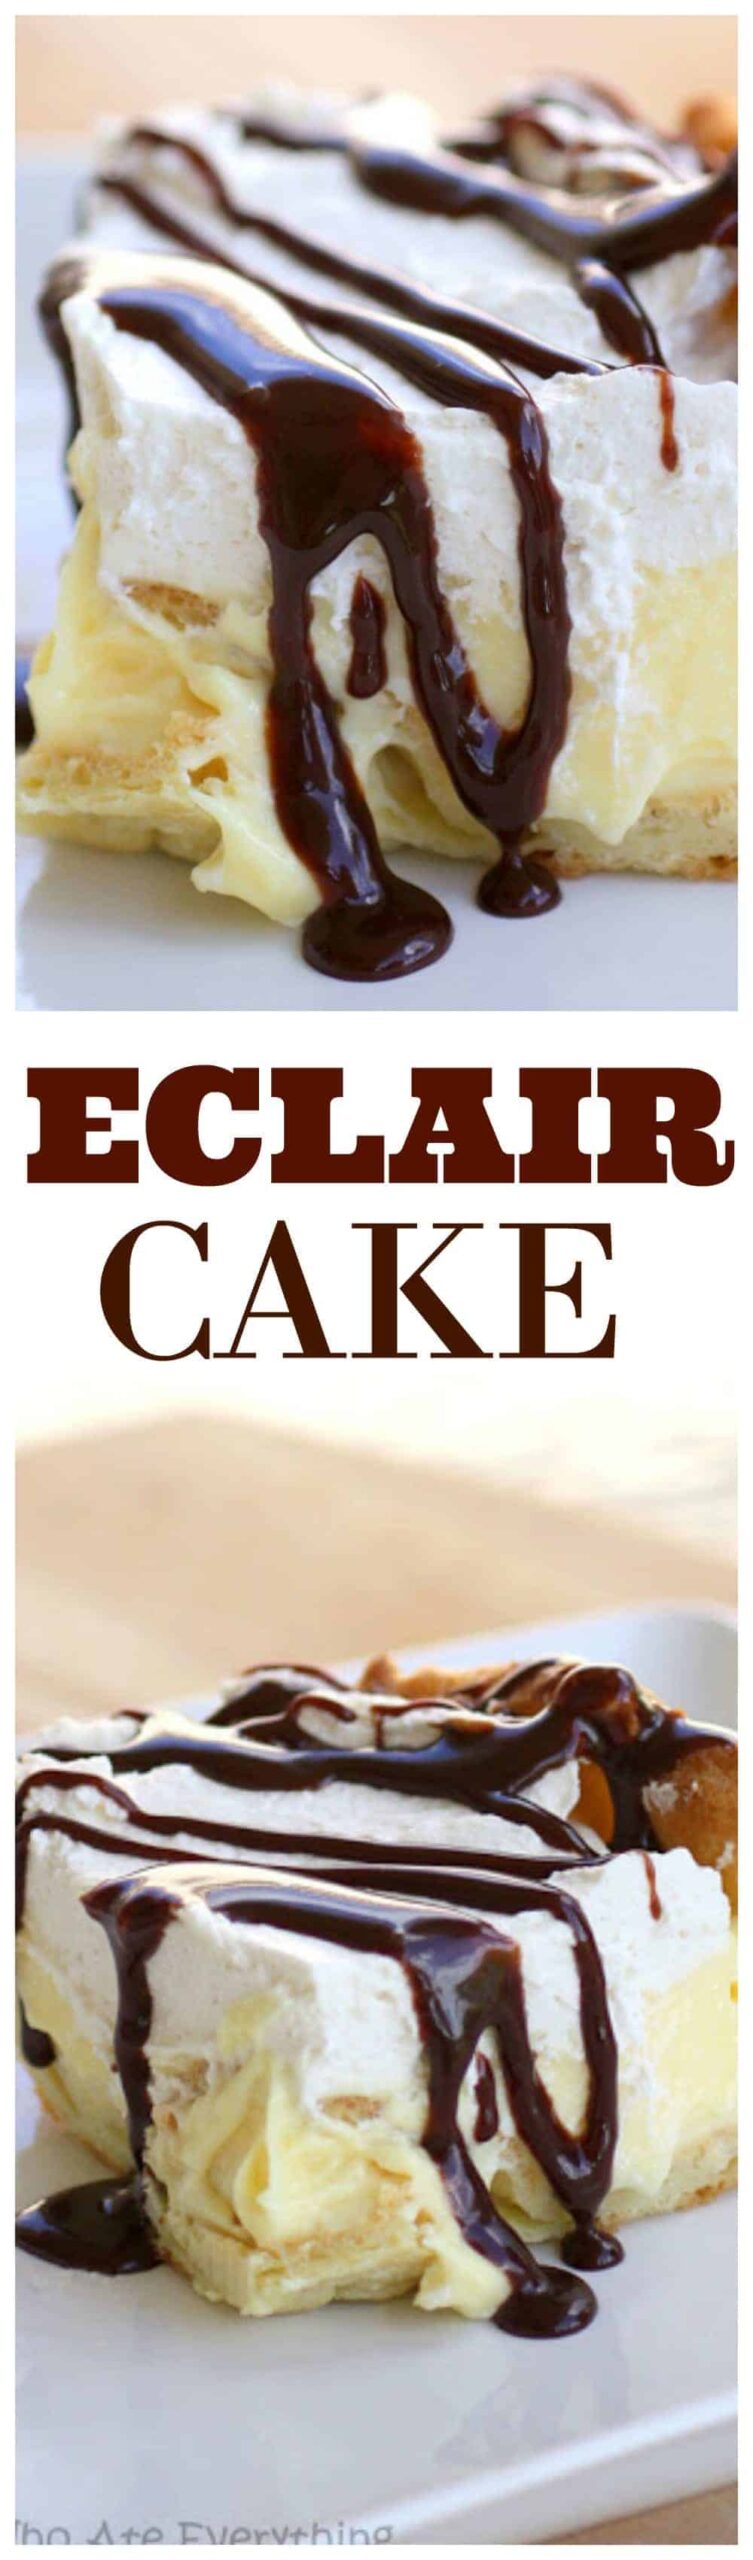 This Eclair Cake has a cream puff crust, vanilla cream cheese layer, whipped cream, and a chocolate drizzle. It's all the flavors of an eclair in cake form. #chocolate #eclair #cake #recipe #dessert